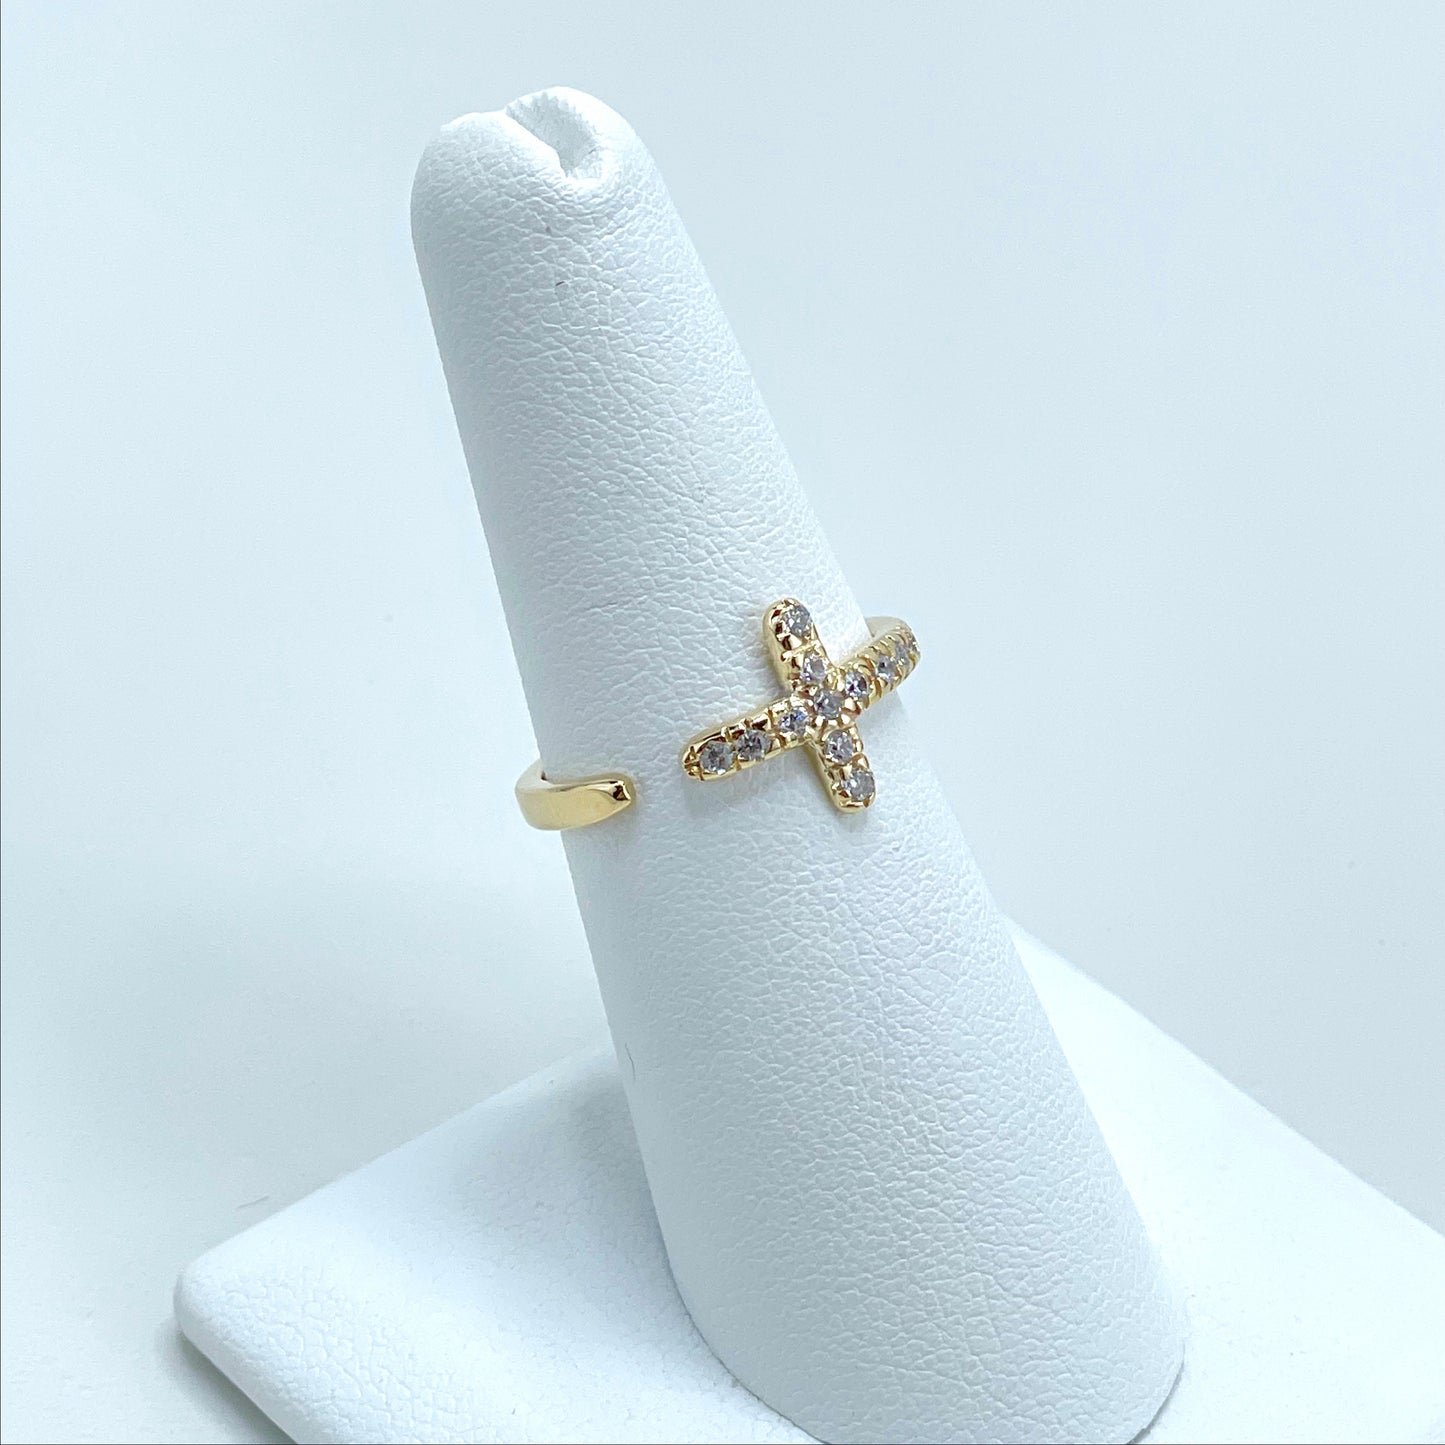 18k Gold Filled With Micro Cubic Zirconia Adjustable Cross Wholesale Jewelry Supplies